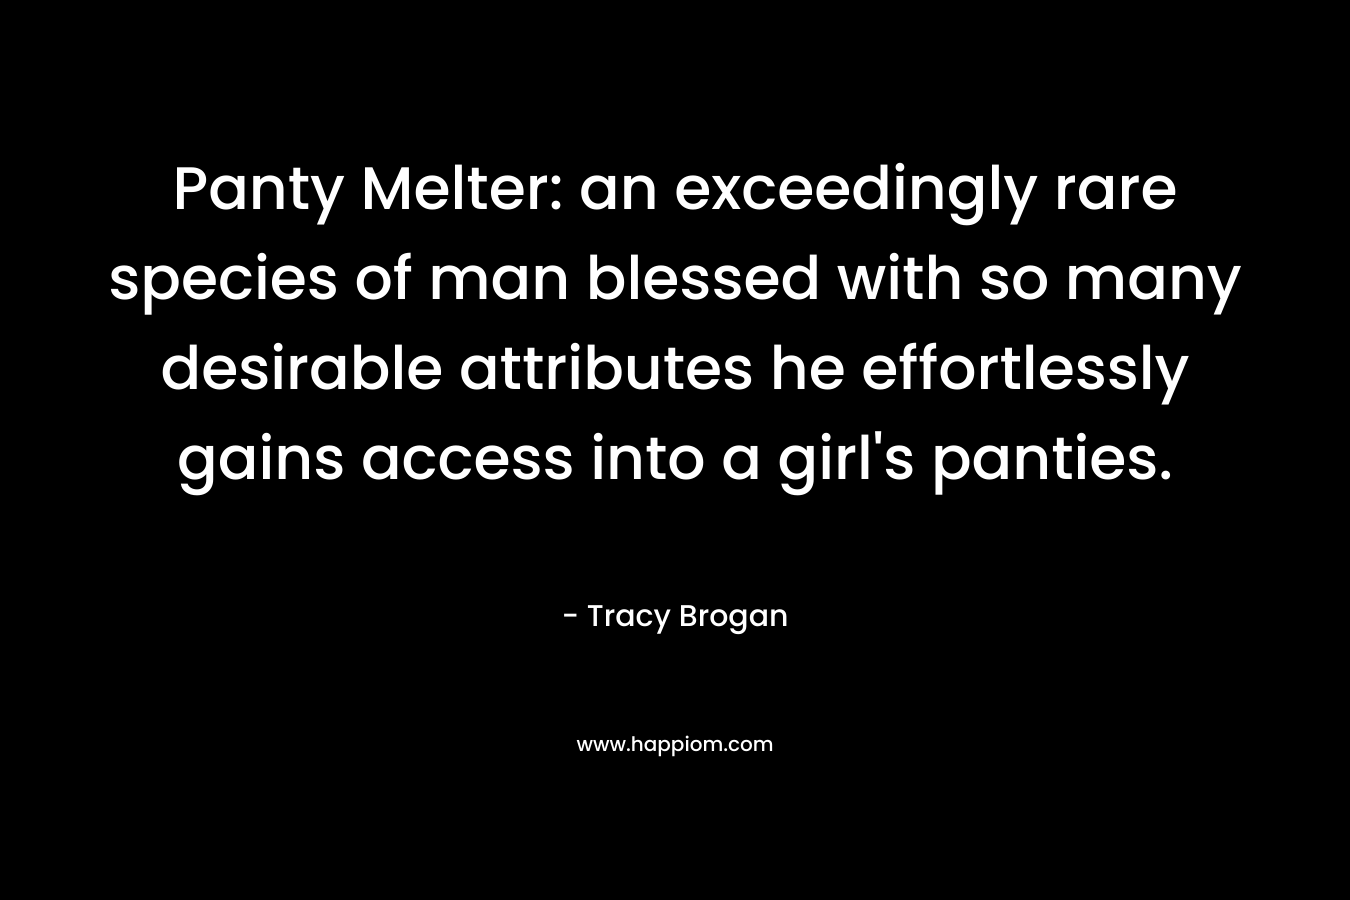 Panty Melter: an exceedingly rare species of man blessed with so many desirable attributes he effortlessly gains access into a girl’s panties. – Tracy Brogan